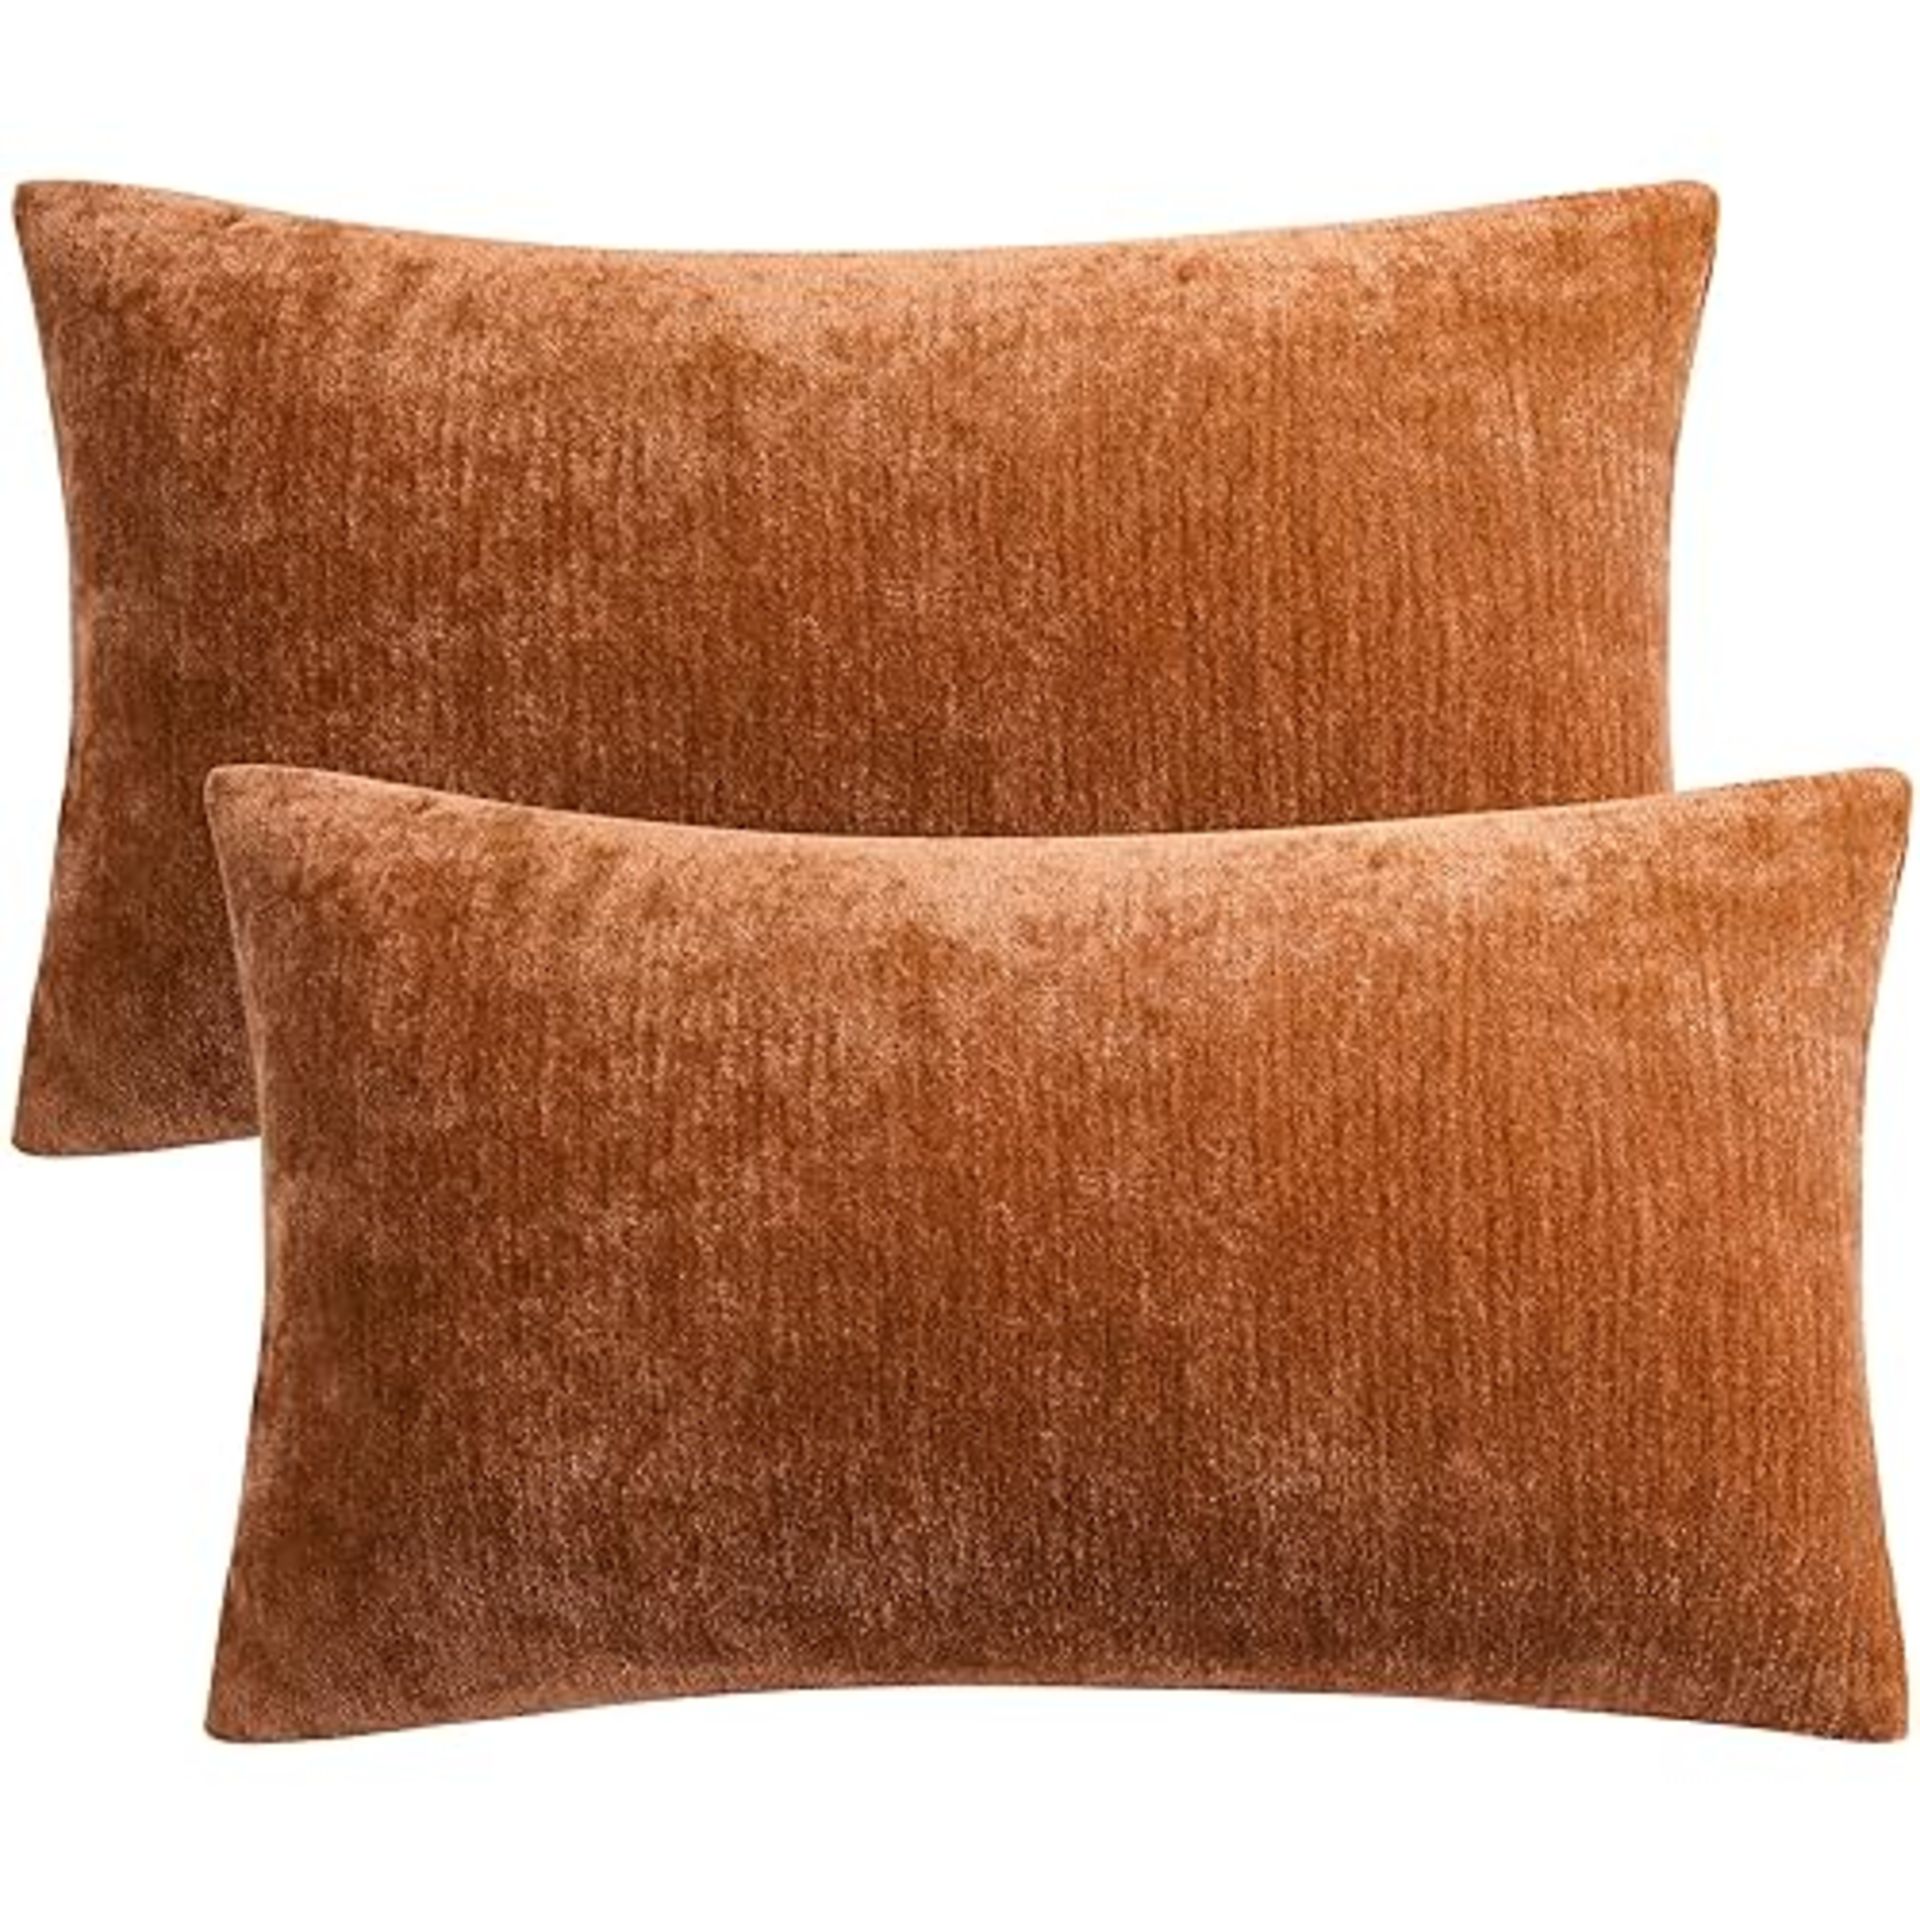 PiccoCasa Pack of 2 Decorative Cushion Covers for Sofa Bedroom, 12x20 Inches (30x50cm) Chenille Thr